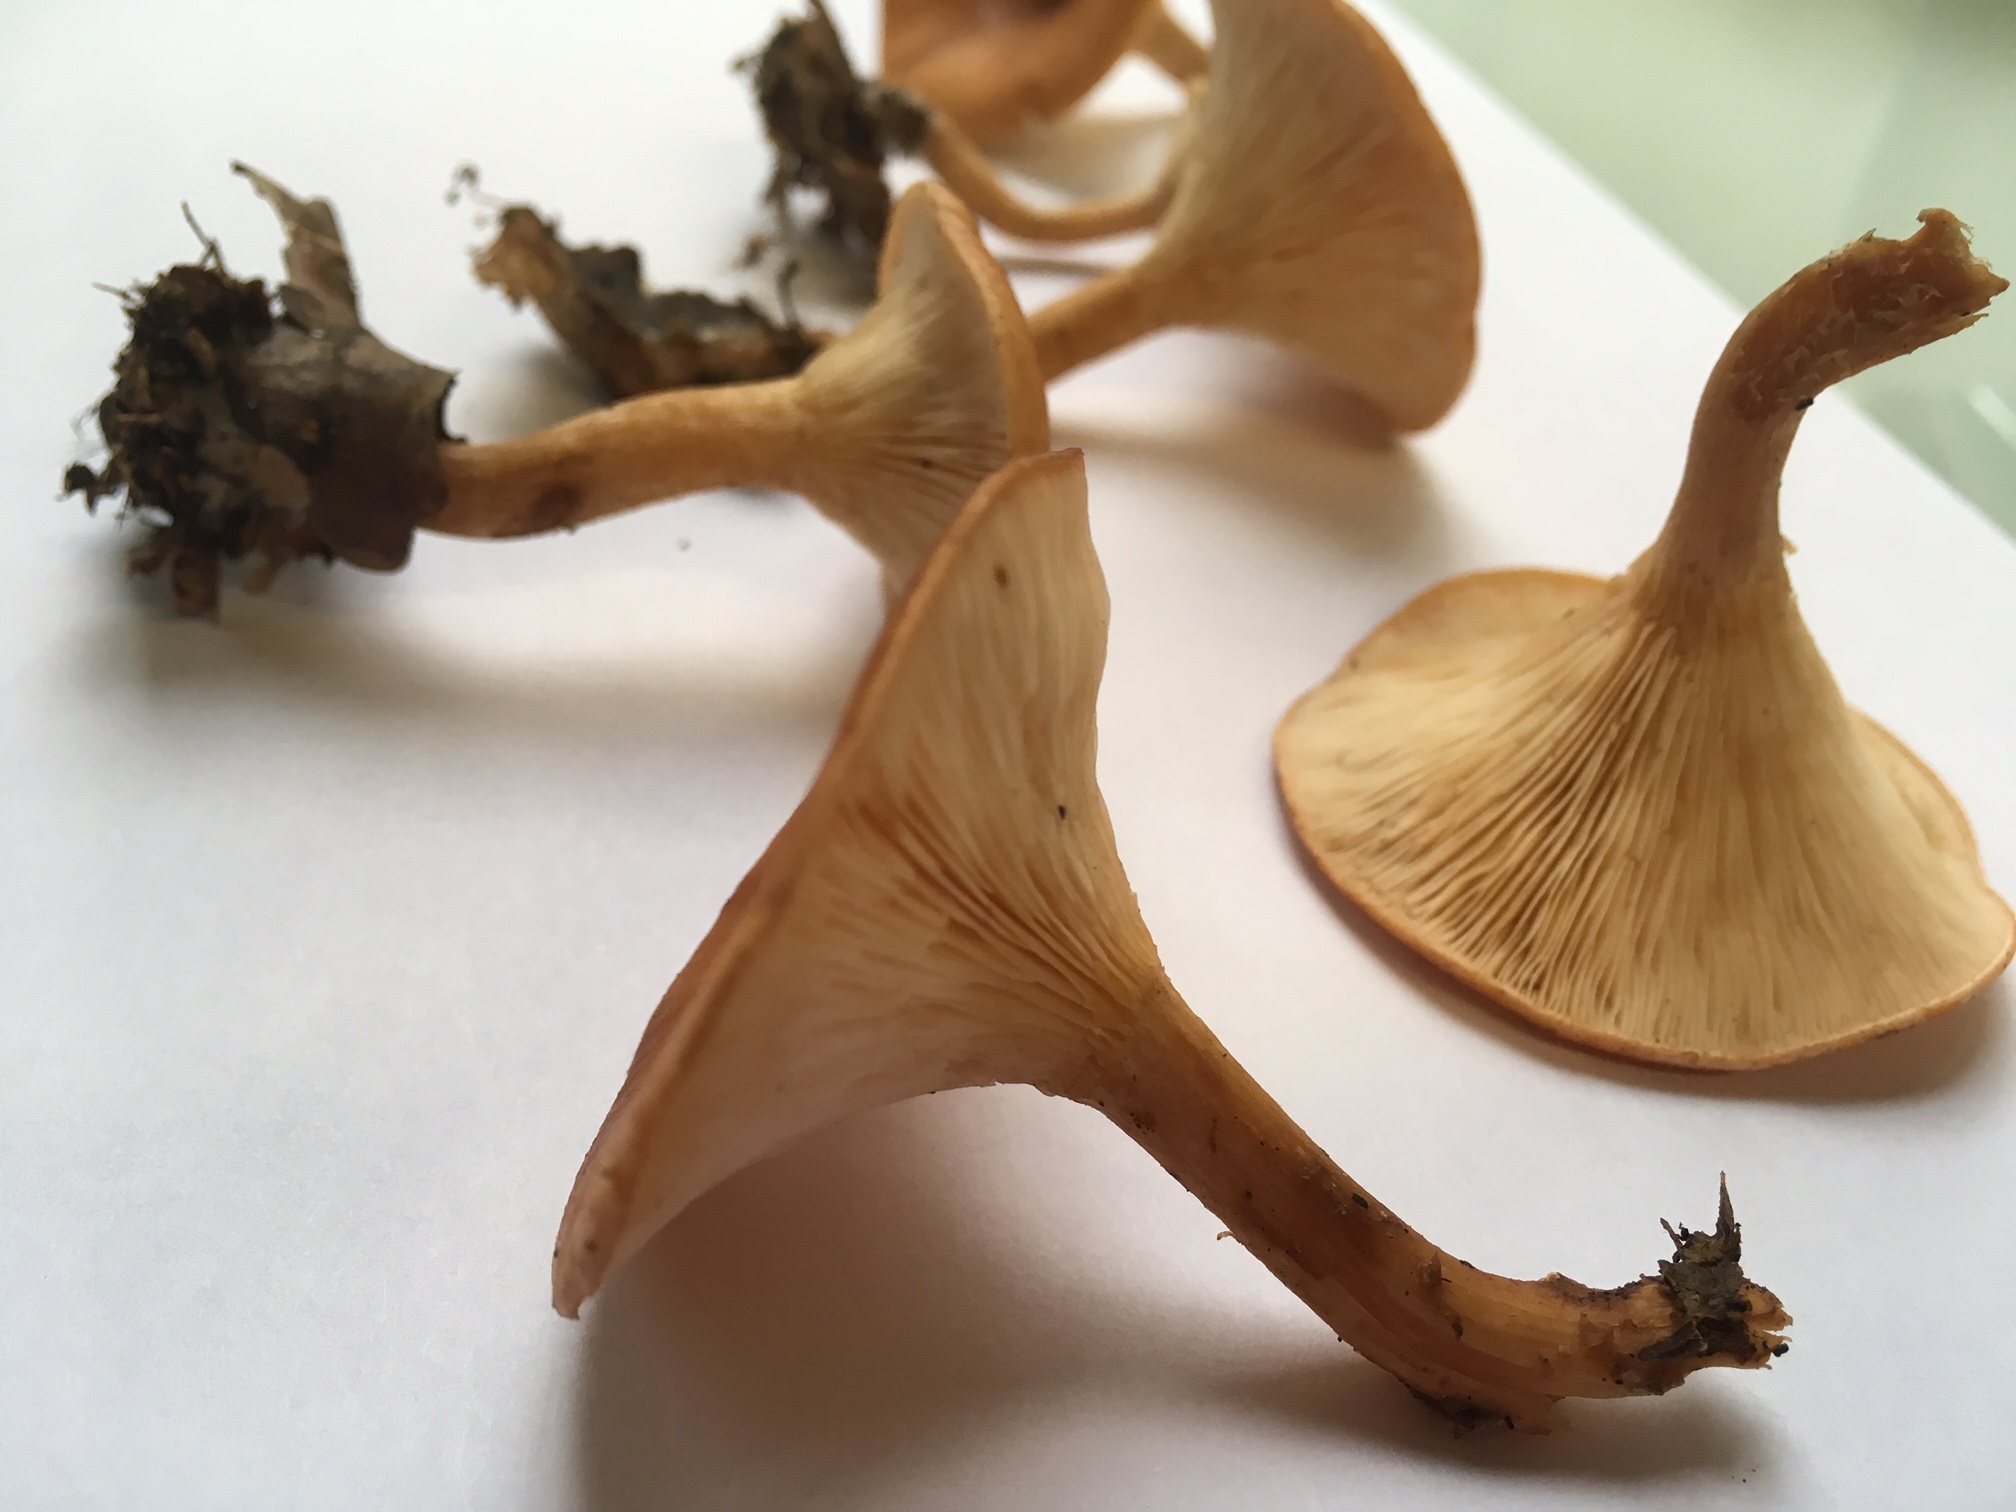 An Edible Mushroom With Potential to Fight Human Genetic Diseases